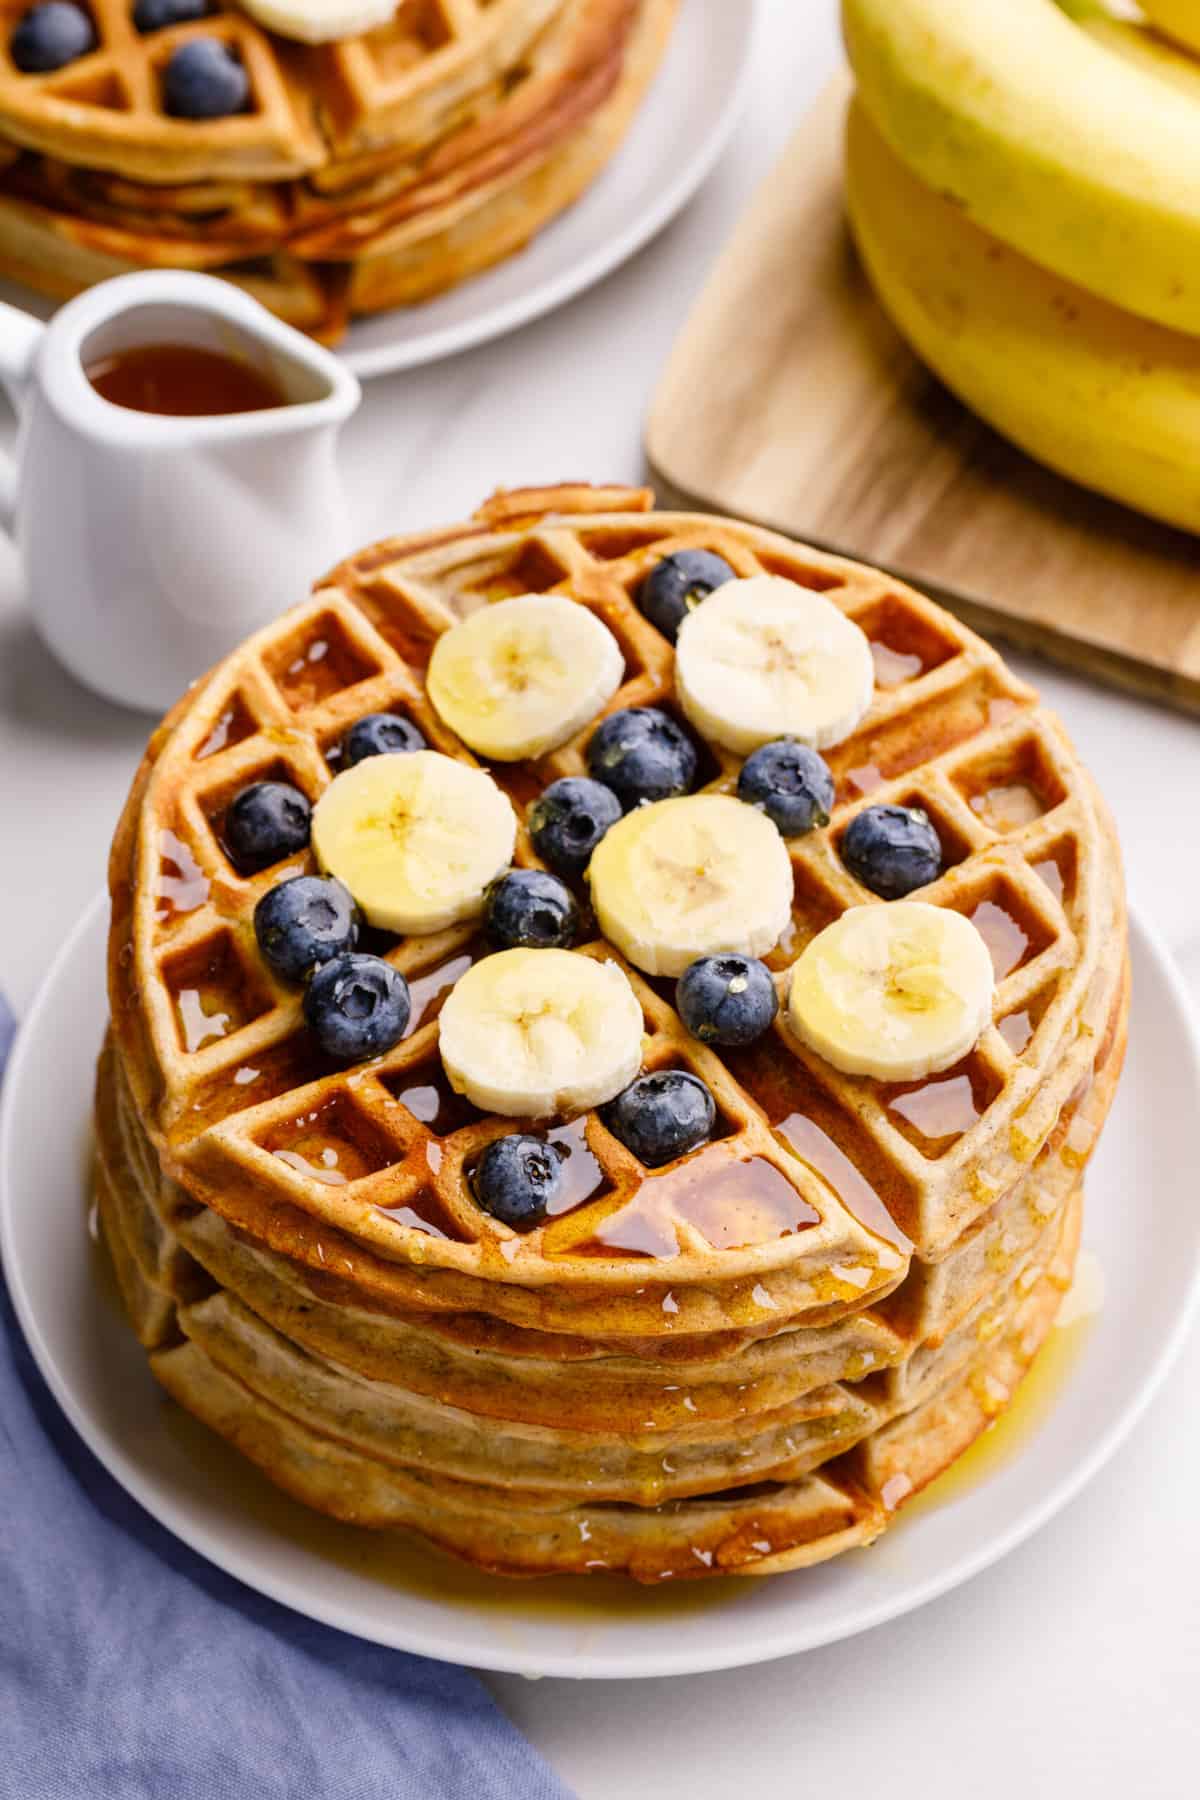 stack of four banana waffles topped with fresh blueberries, sliced bananas and syrup served on a white round plate.